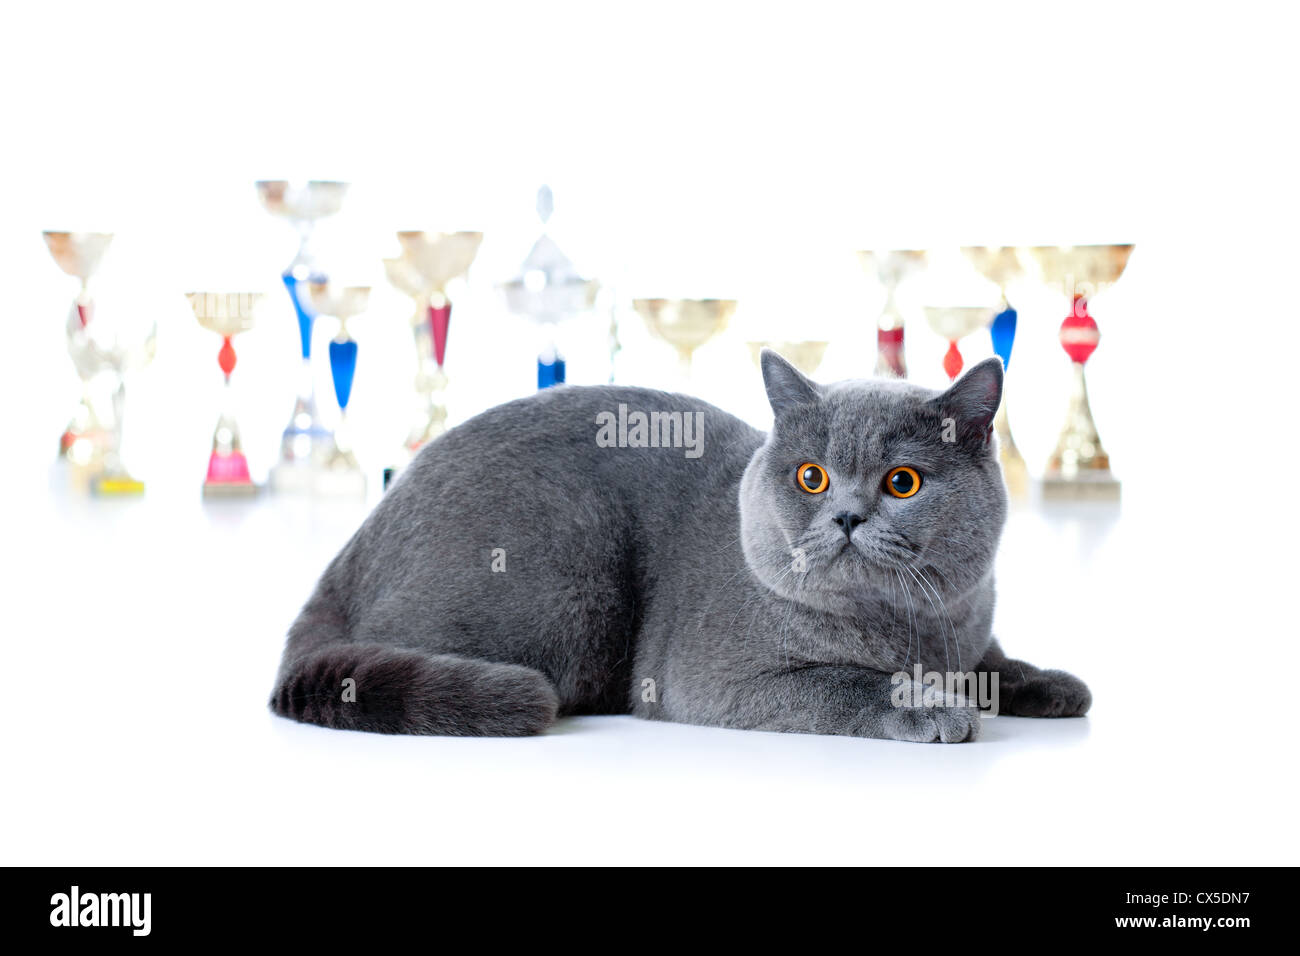 Champion cat with cups isolated on white Stock Photo